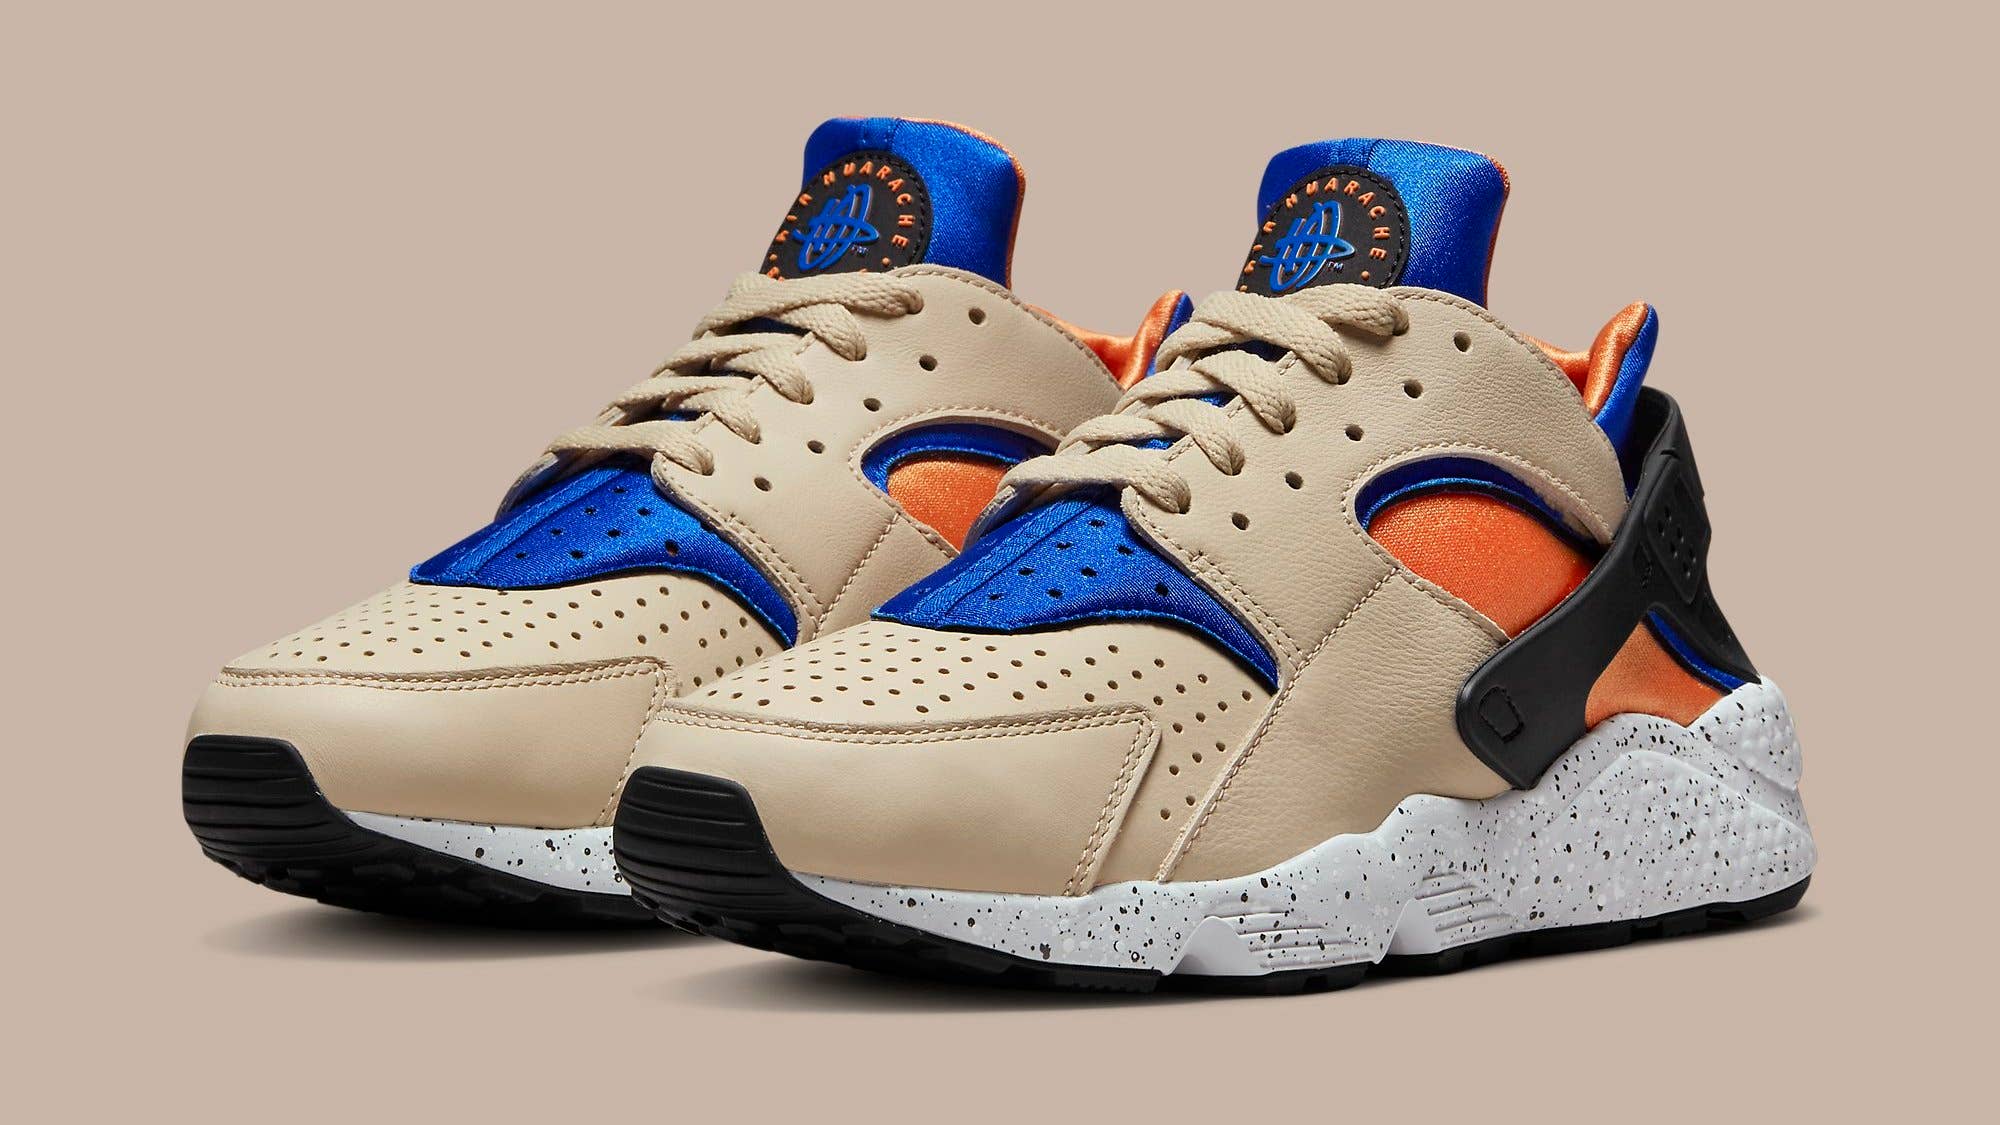 A Mowabb-Inspired Nike Air Huarache Is Releasing This Month